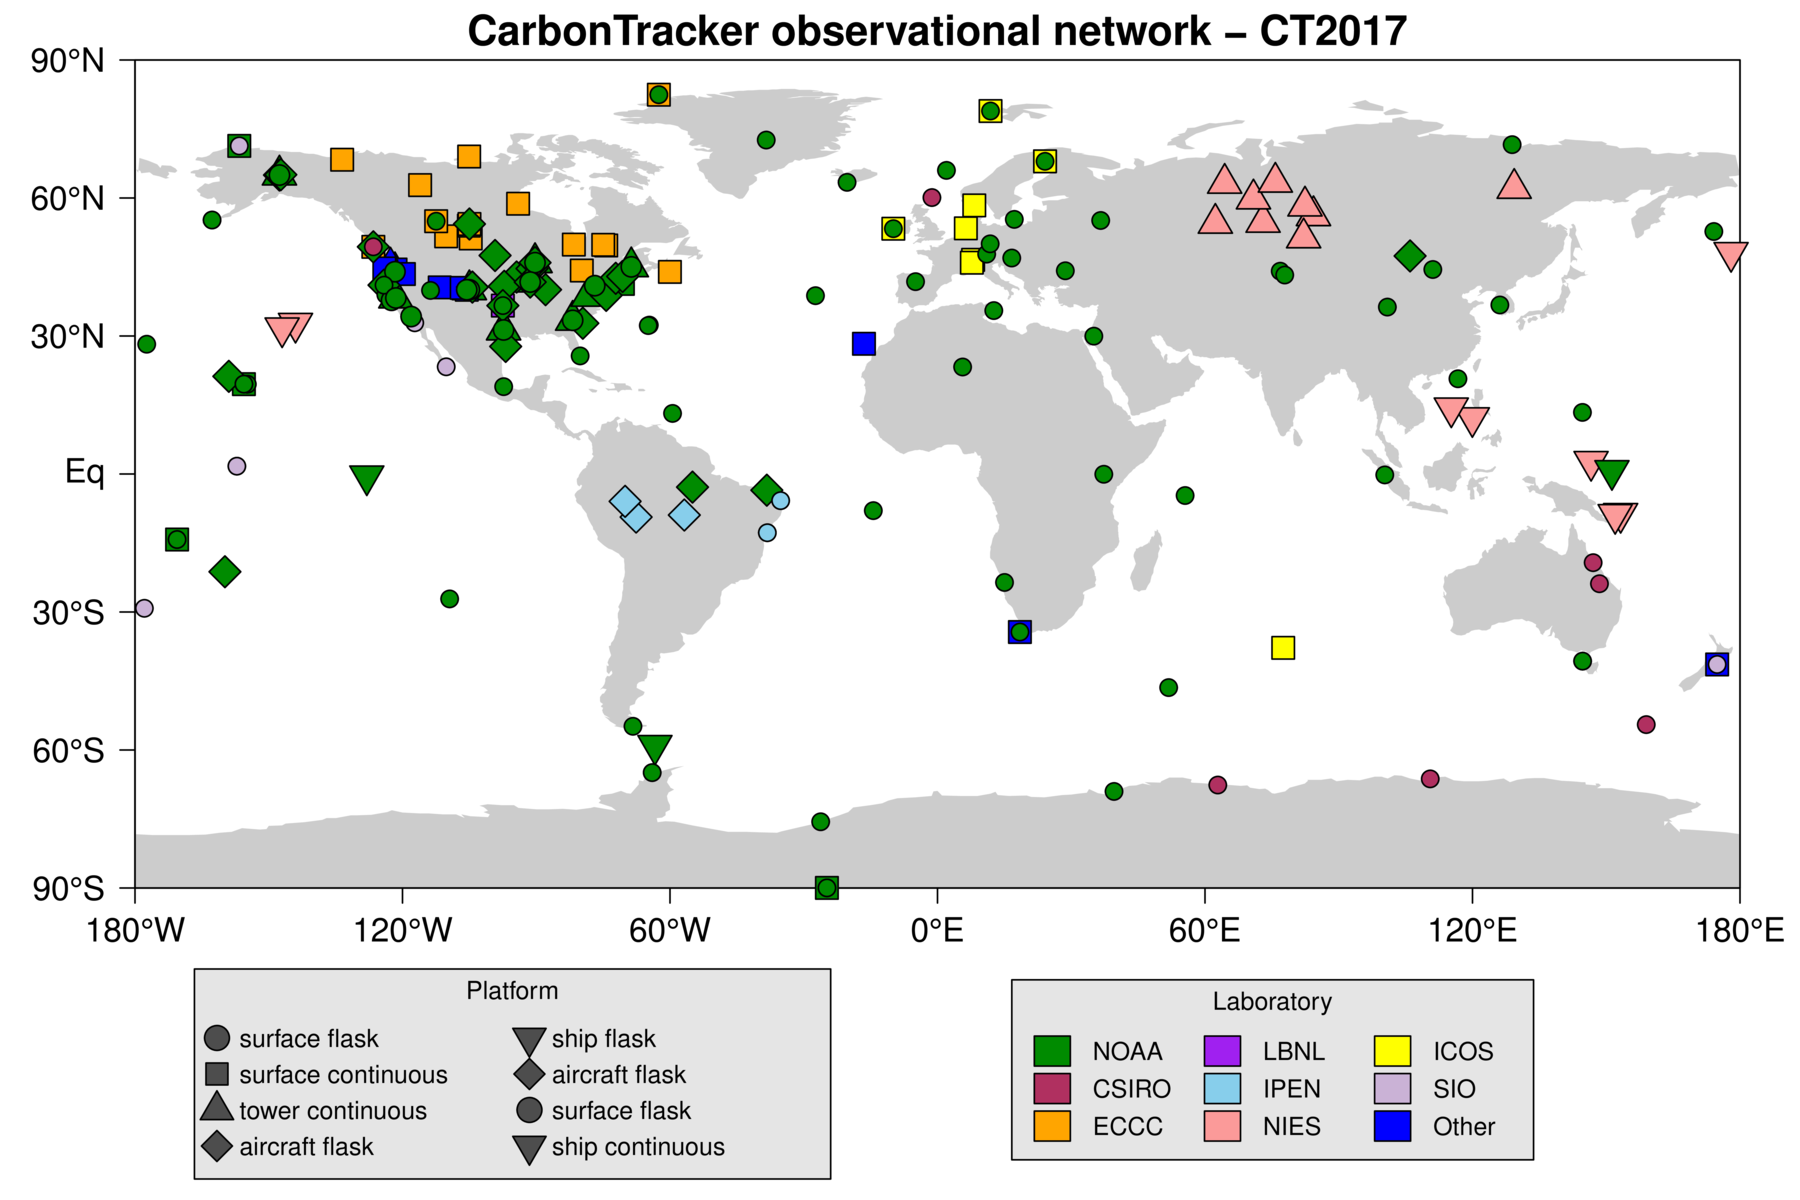 /webdata/ccgg/CT2017/summary/network-global.png